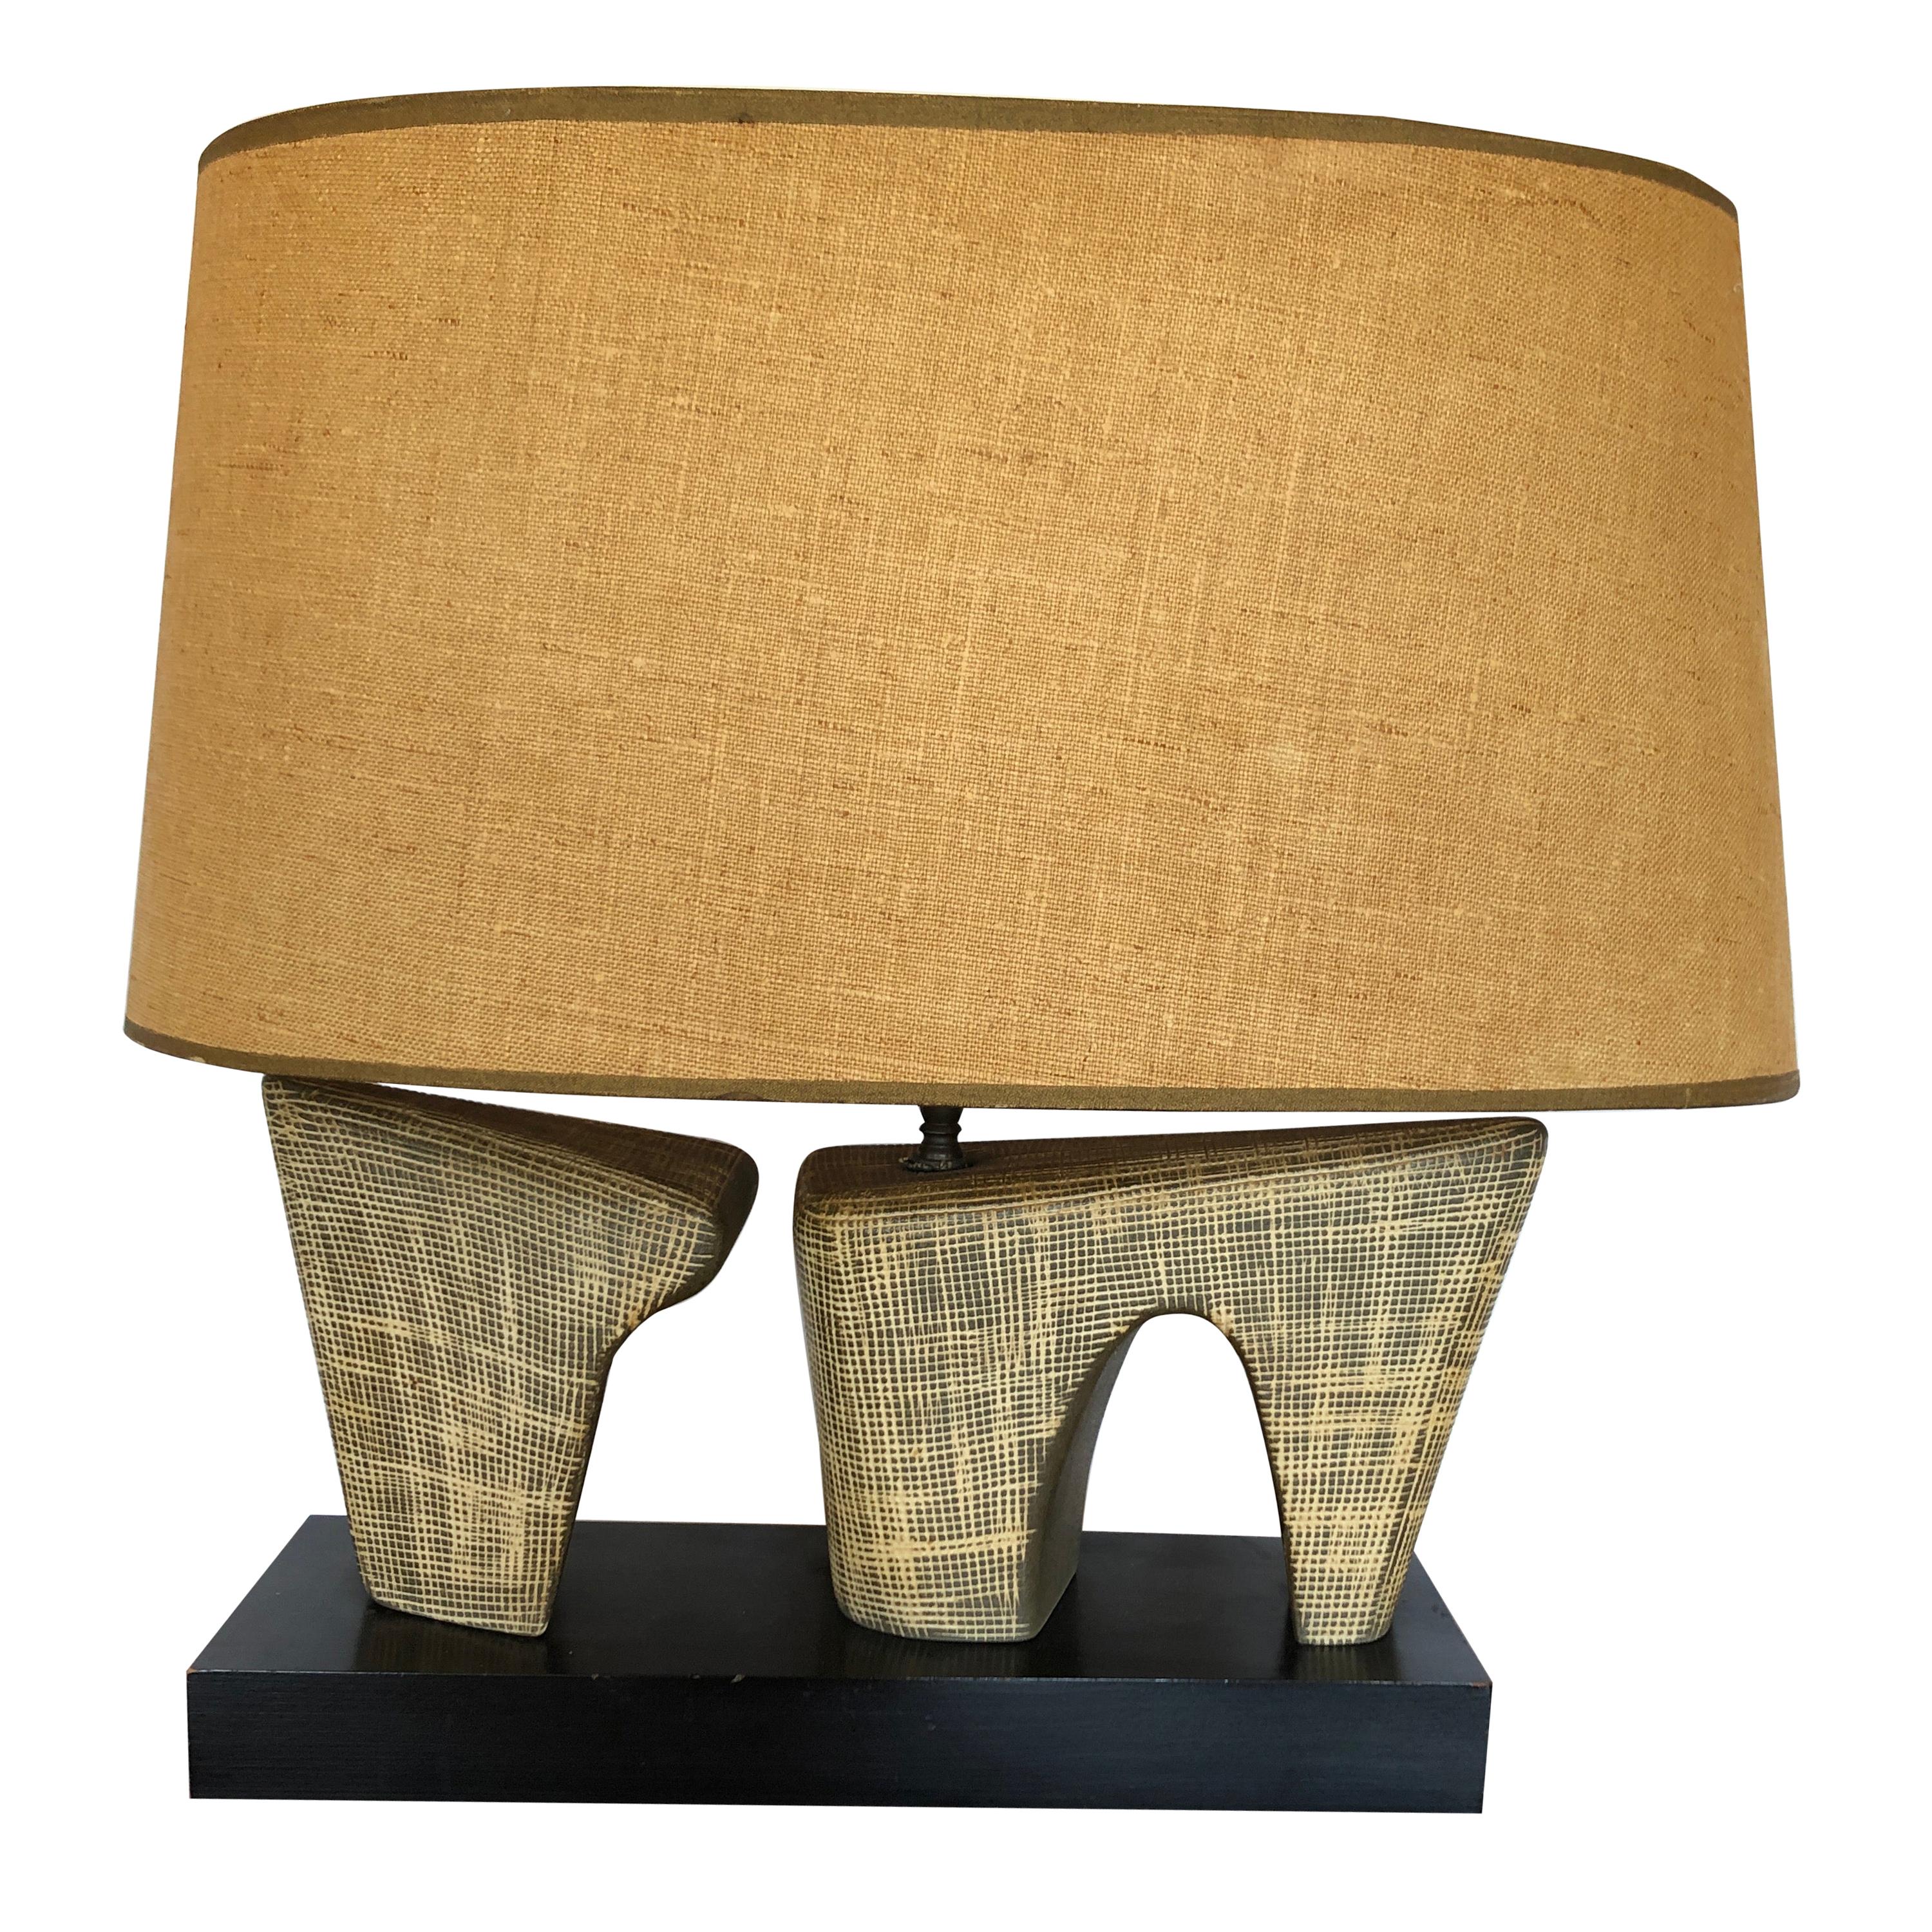 Super Stylish Mid-Century Modern Pottery Lamp with Oval Linen Shade